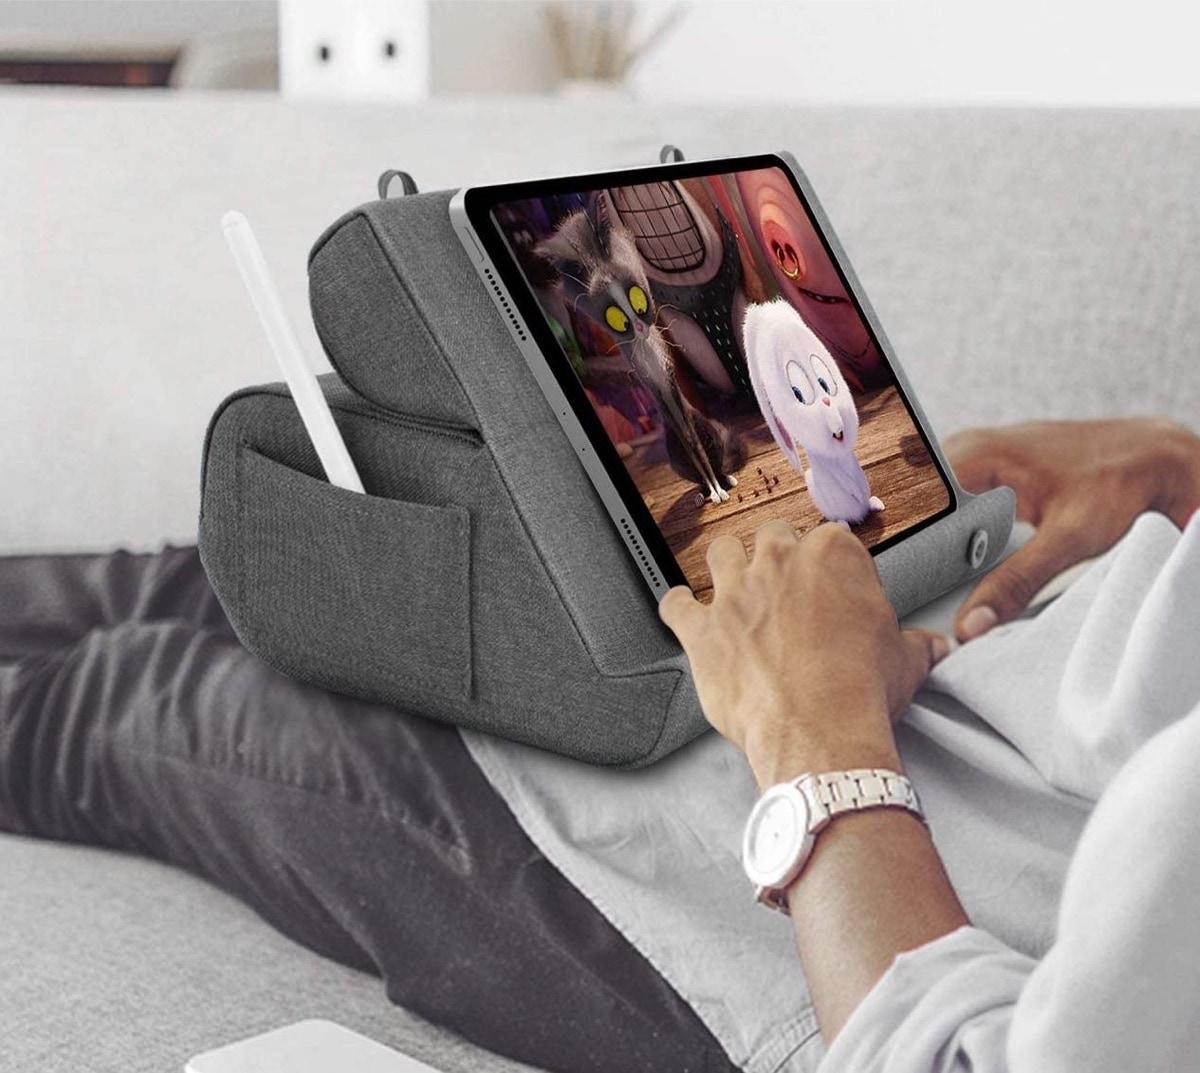 iPad hands-free watching pillow stand